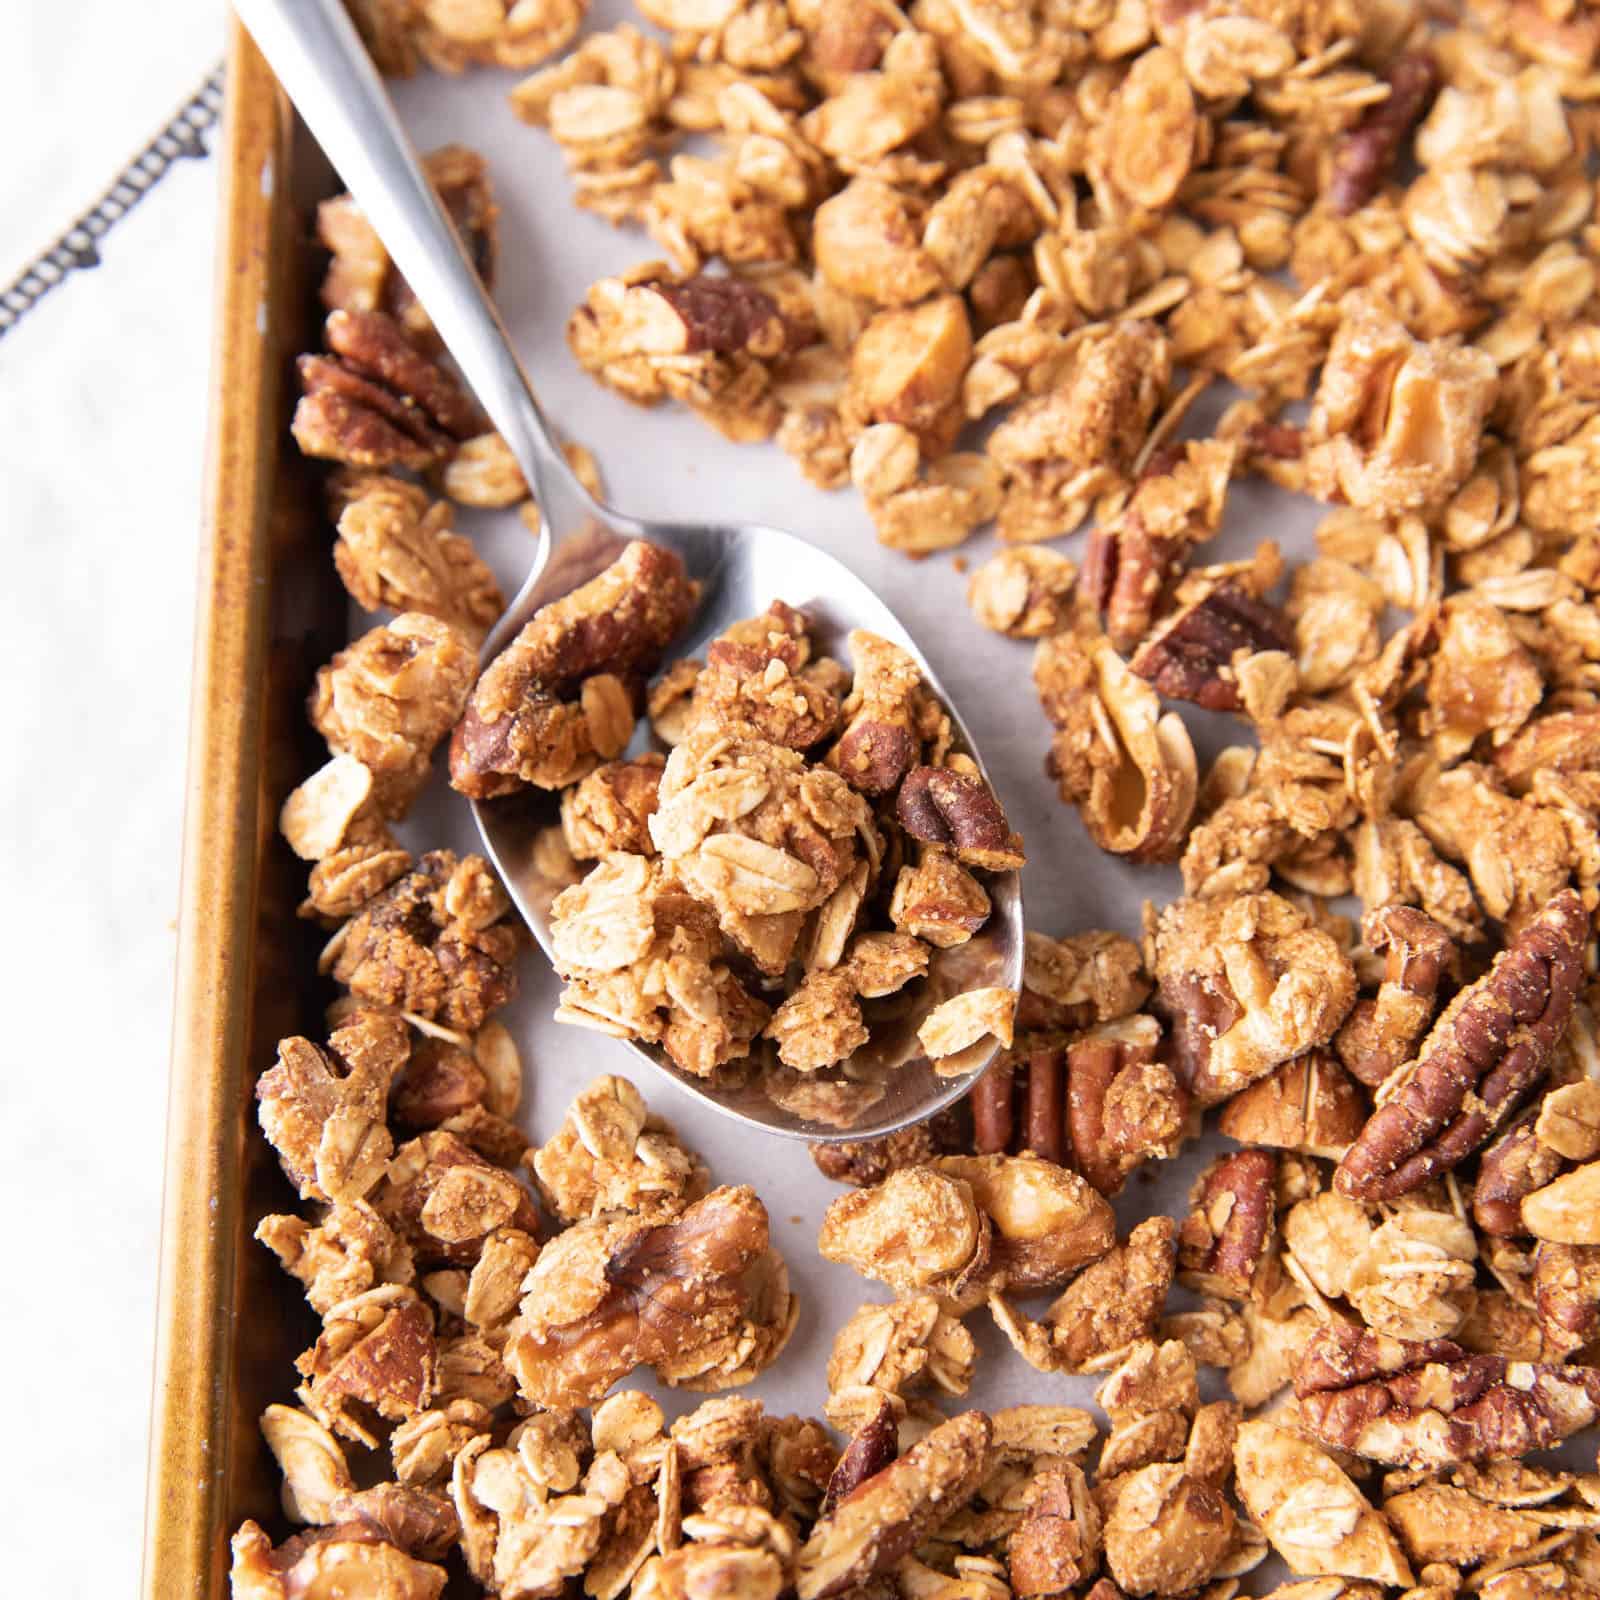 Granola Market Is Estimated To Witness High Growth Owing To Increasing Health Consciousness and Growing Demand for Convenient and Nutritious Snacks